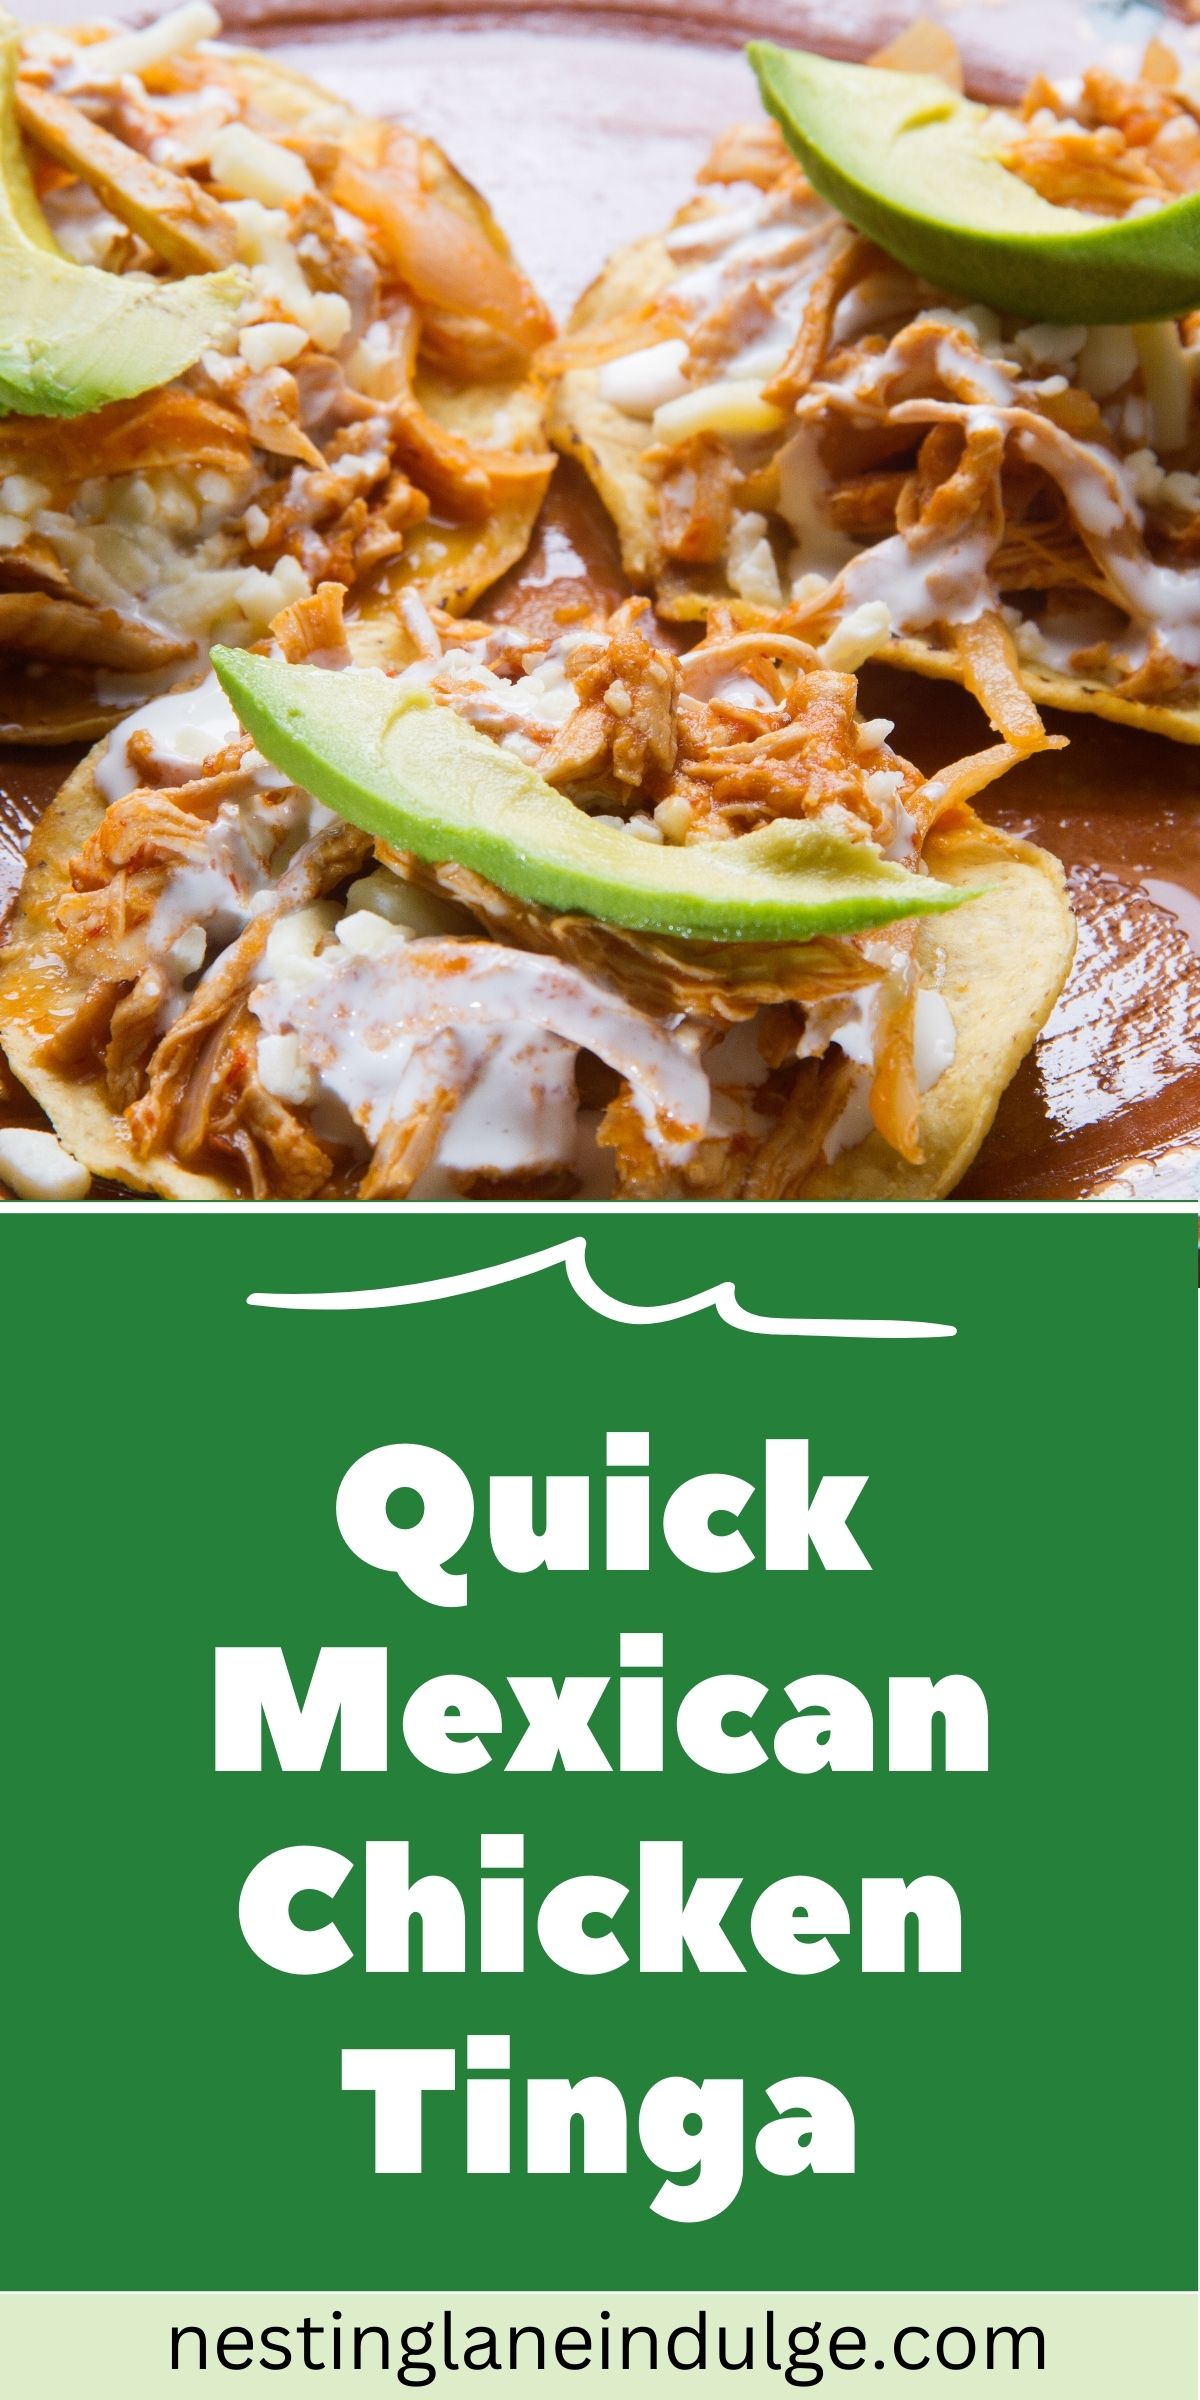 Graphic for Pinterest of Quick and Easy Mexican Chicken Tinga Recipe.